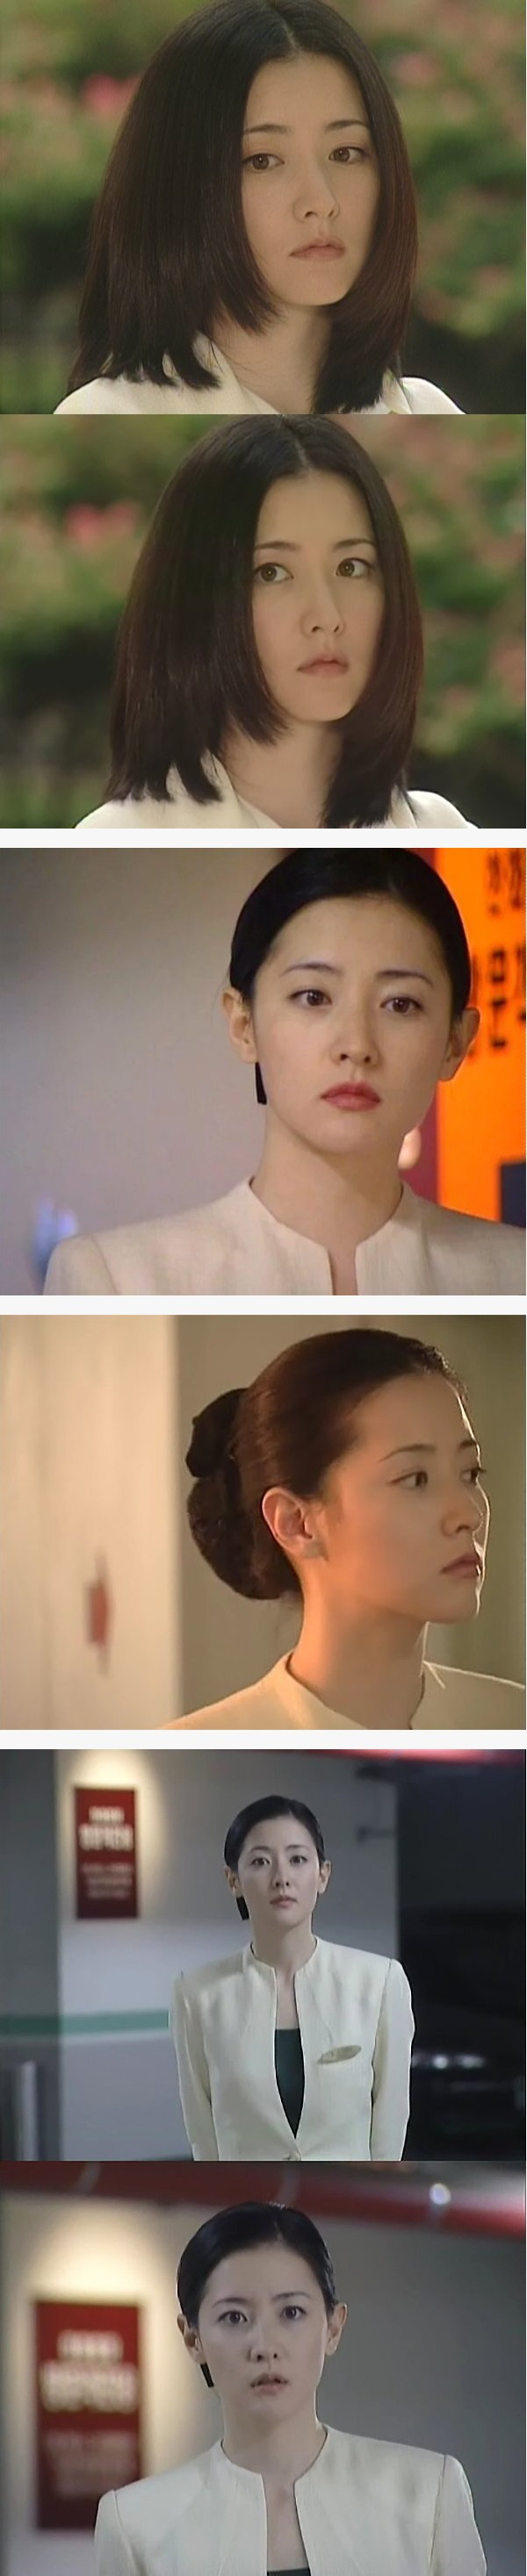 Lee Young-ae's beauty in her late 20s